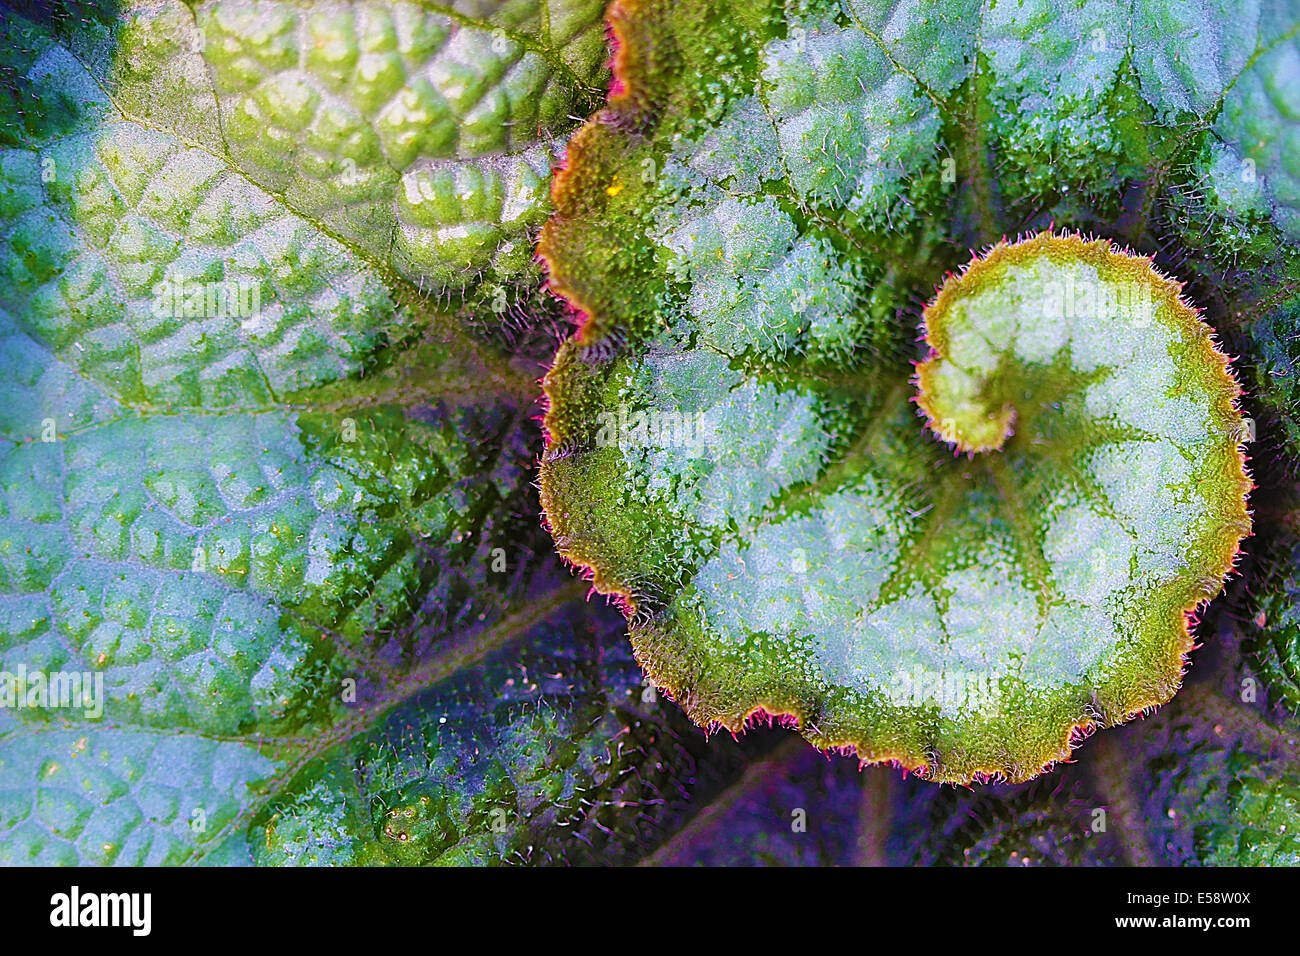 The Rex Begonia is known for its large hairy colorful leaves and is a perennial. Stock Photo